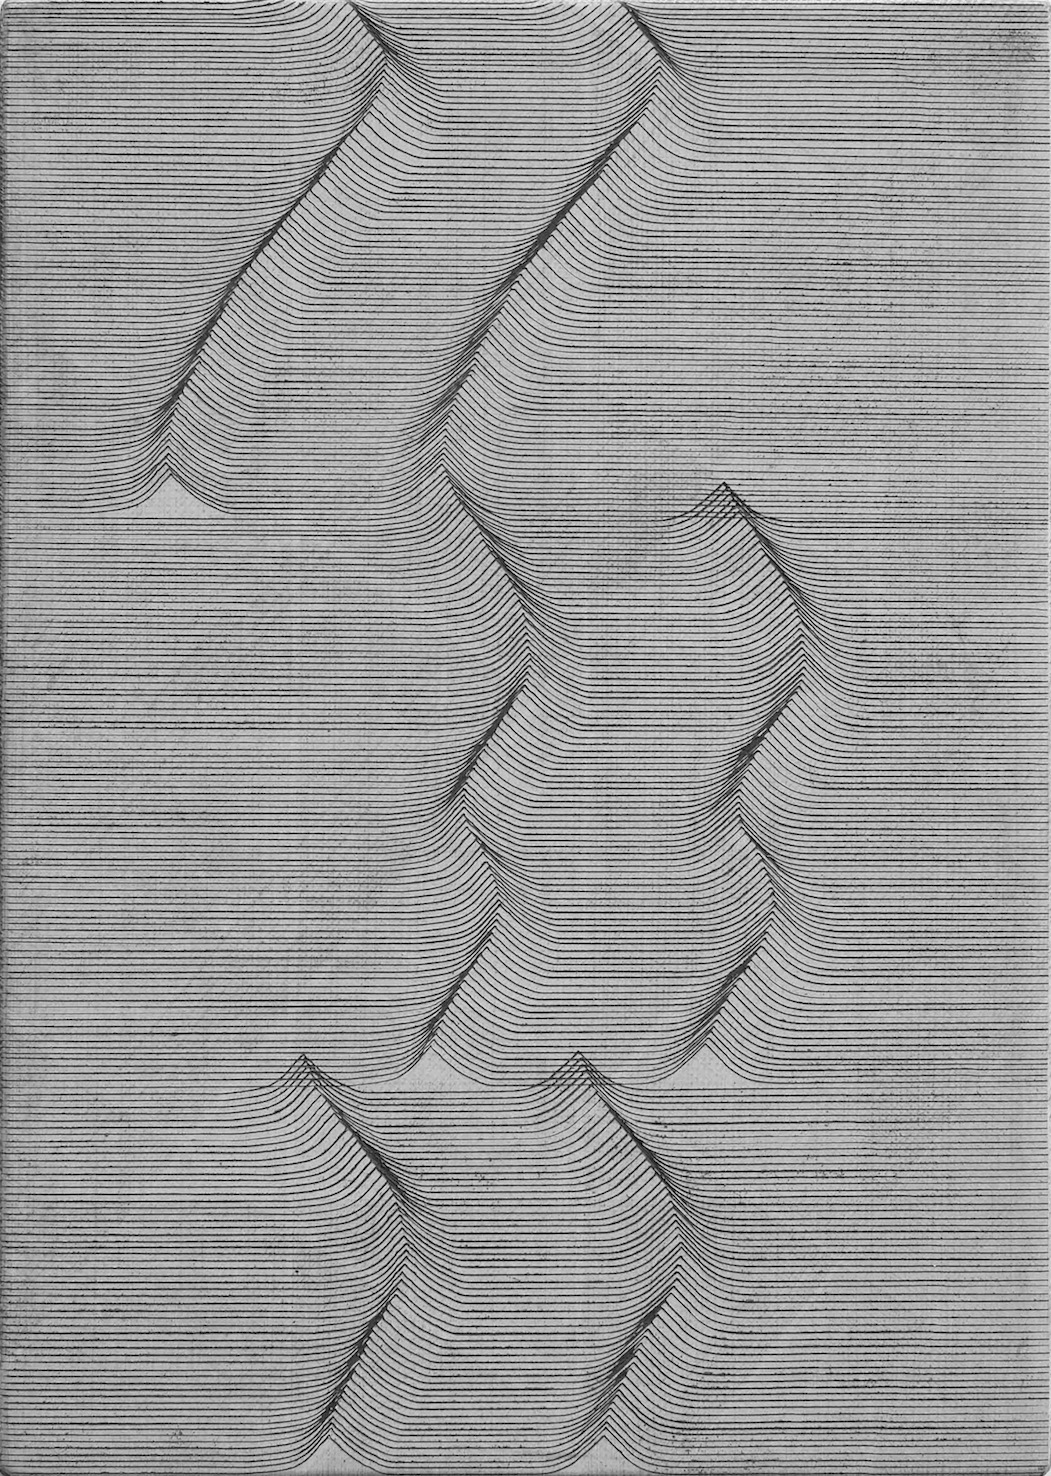   Long Ending (White)   Casein Paint and Scratches on Gesso Panel  30 x 21.5 x 2.5 cm 